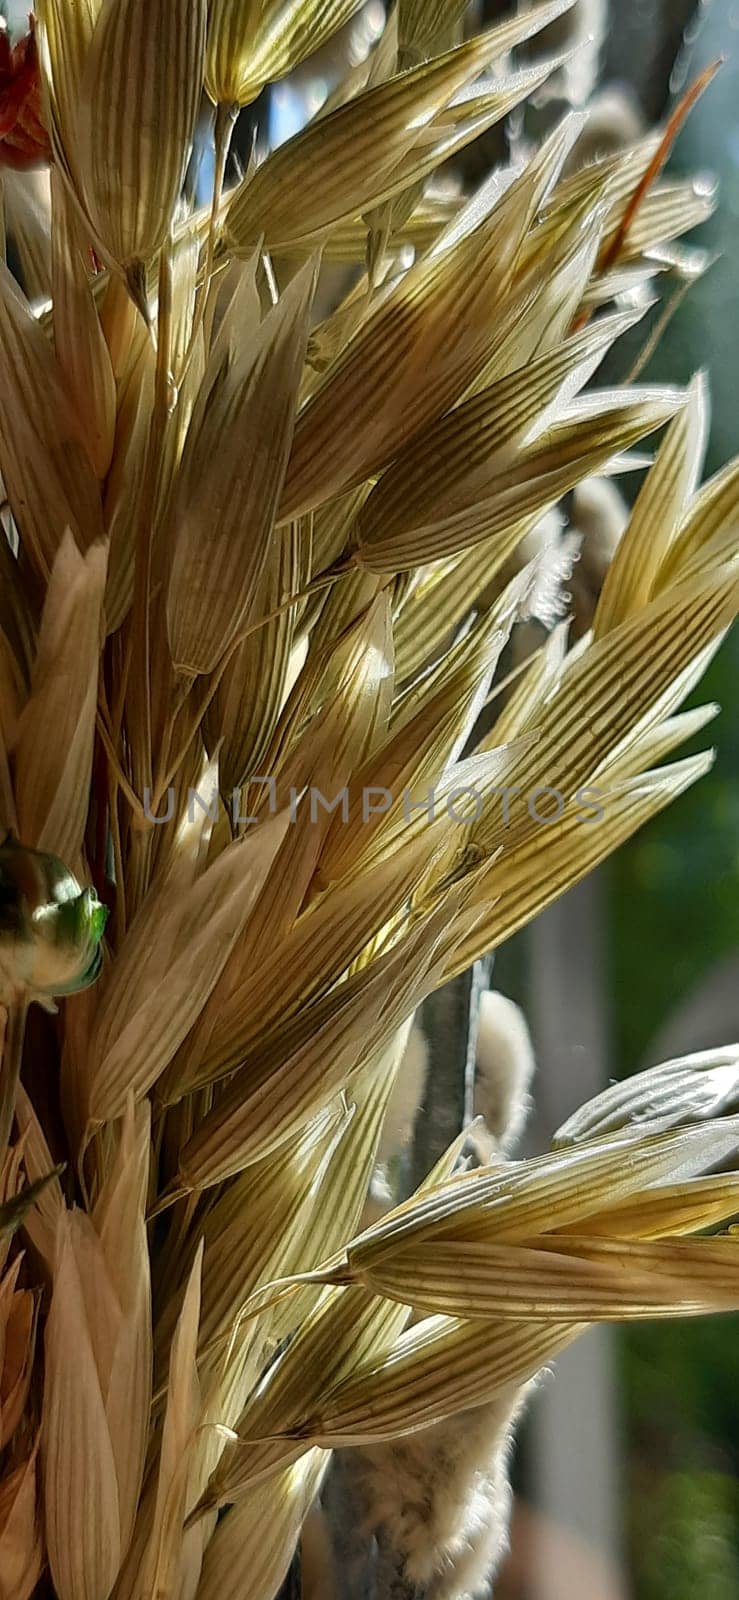 Dried spikelets of a grain plant.
Oats are unpretentious and frost-resistant.